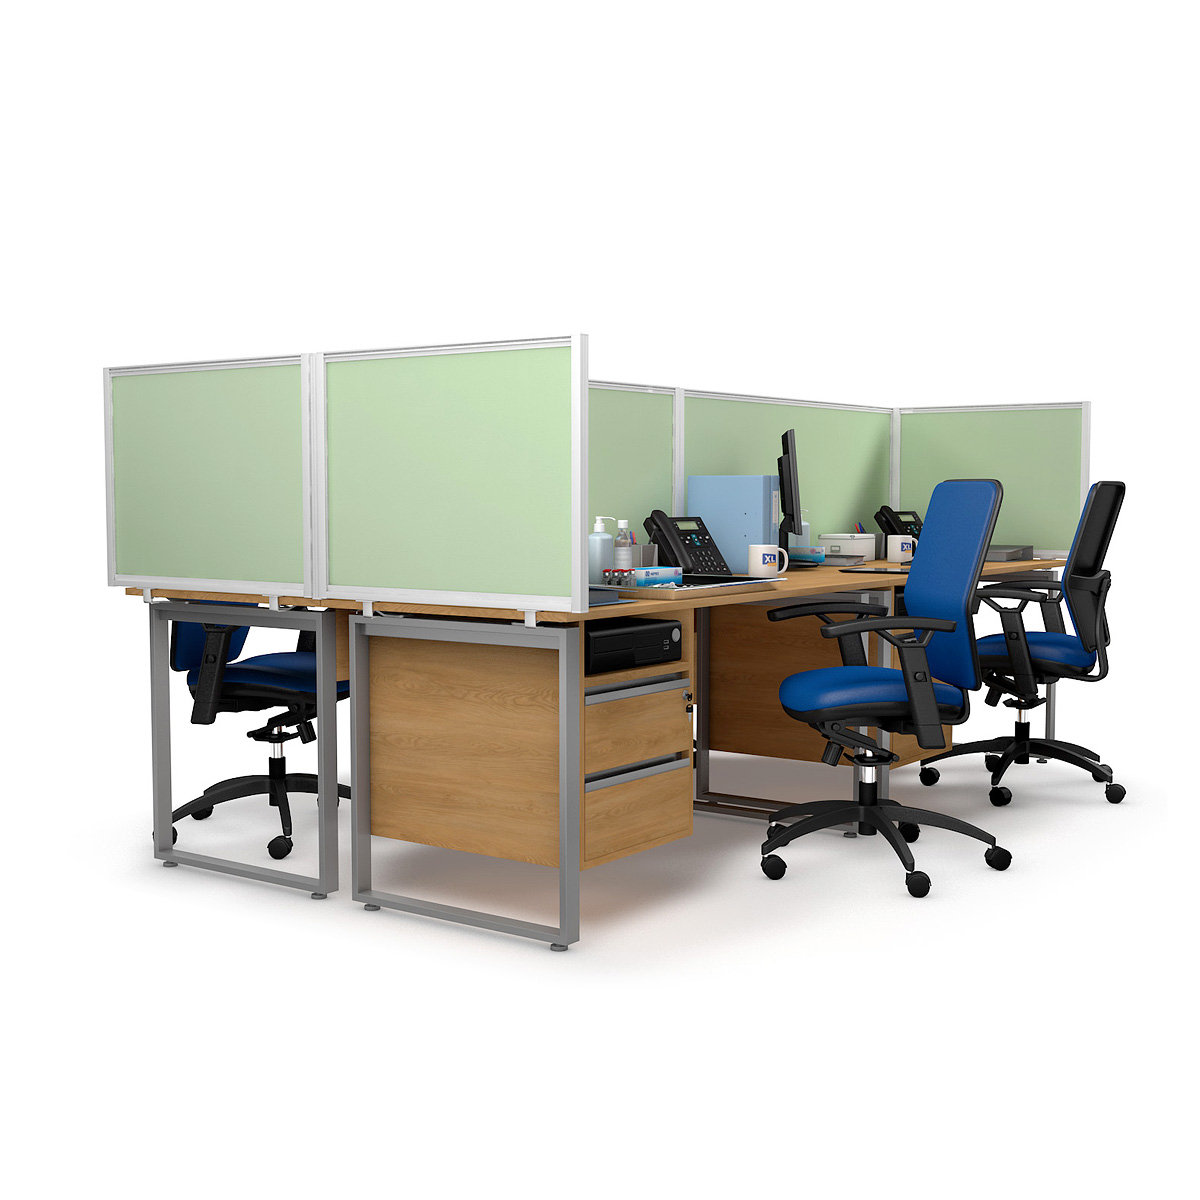 FRONTIER® Medical Screens Anti Microbial Desk Screen Dividers 